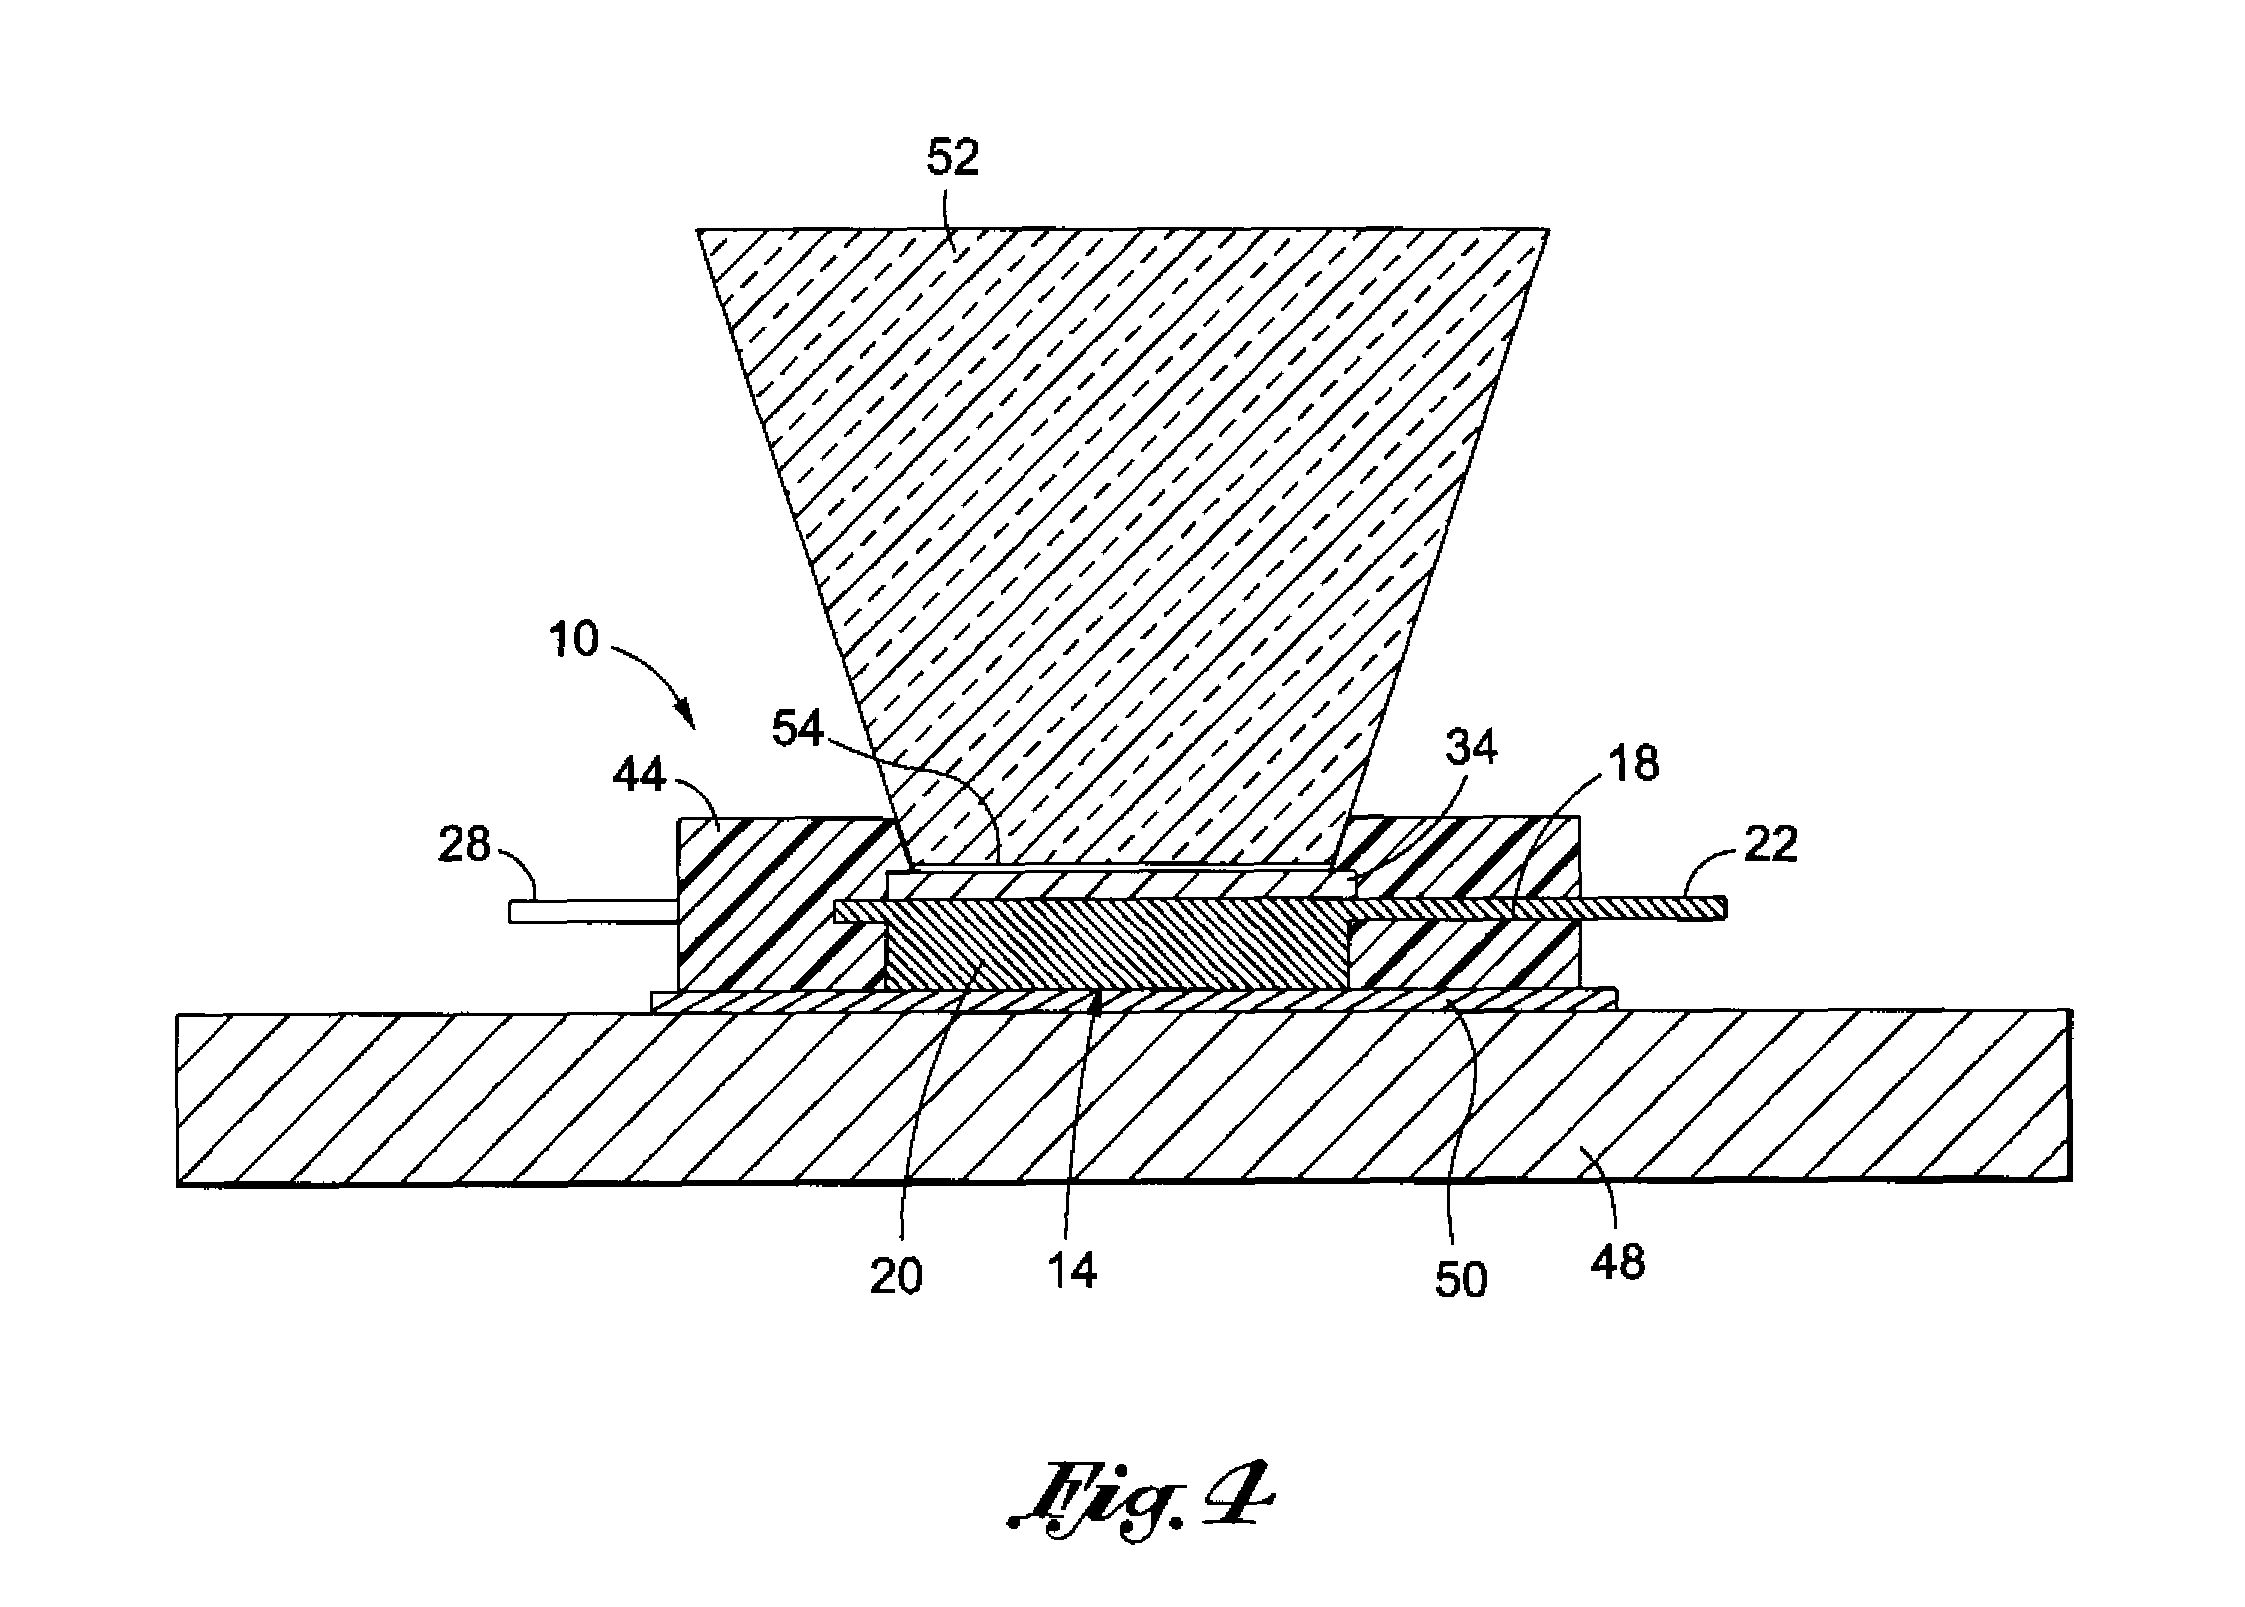 Leadframe structure for concentrated photovoltaic receiver package